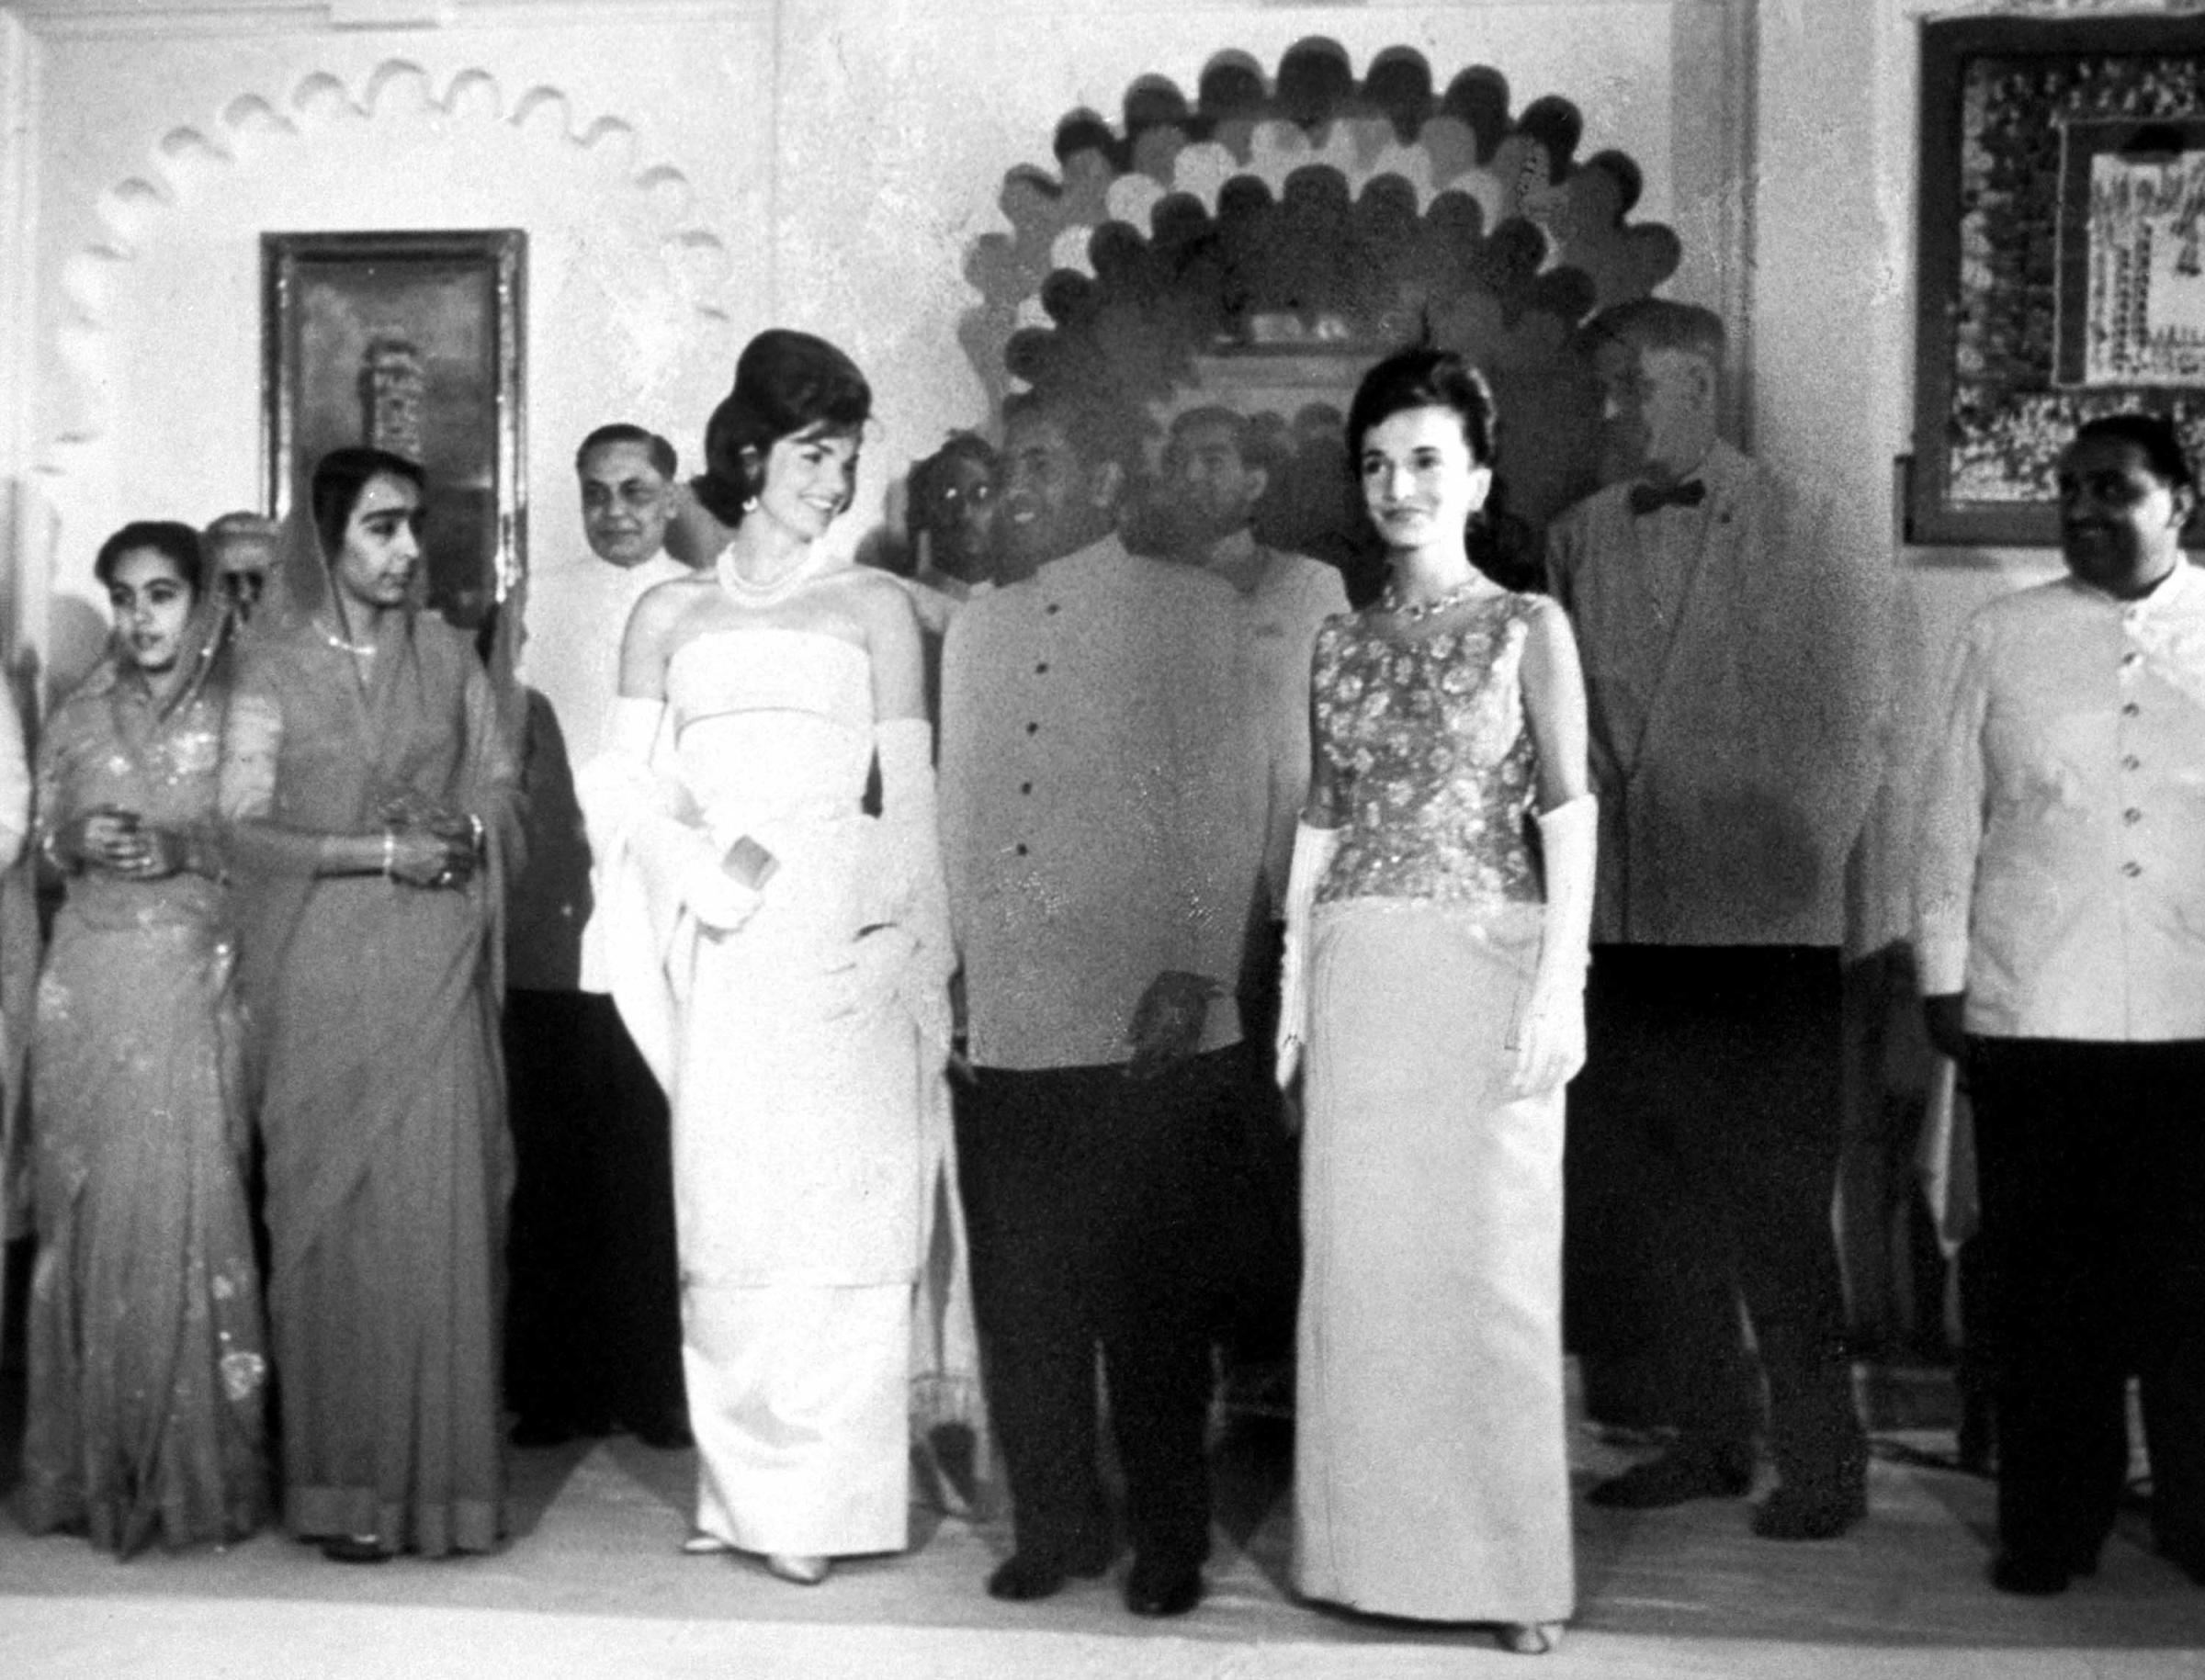 Jackie Kennedy attends a formal event in India in 1962.